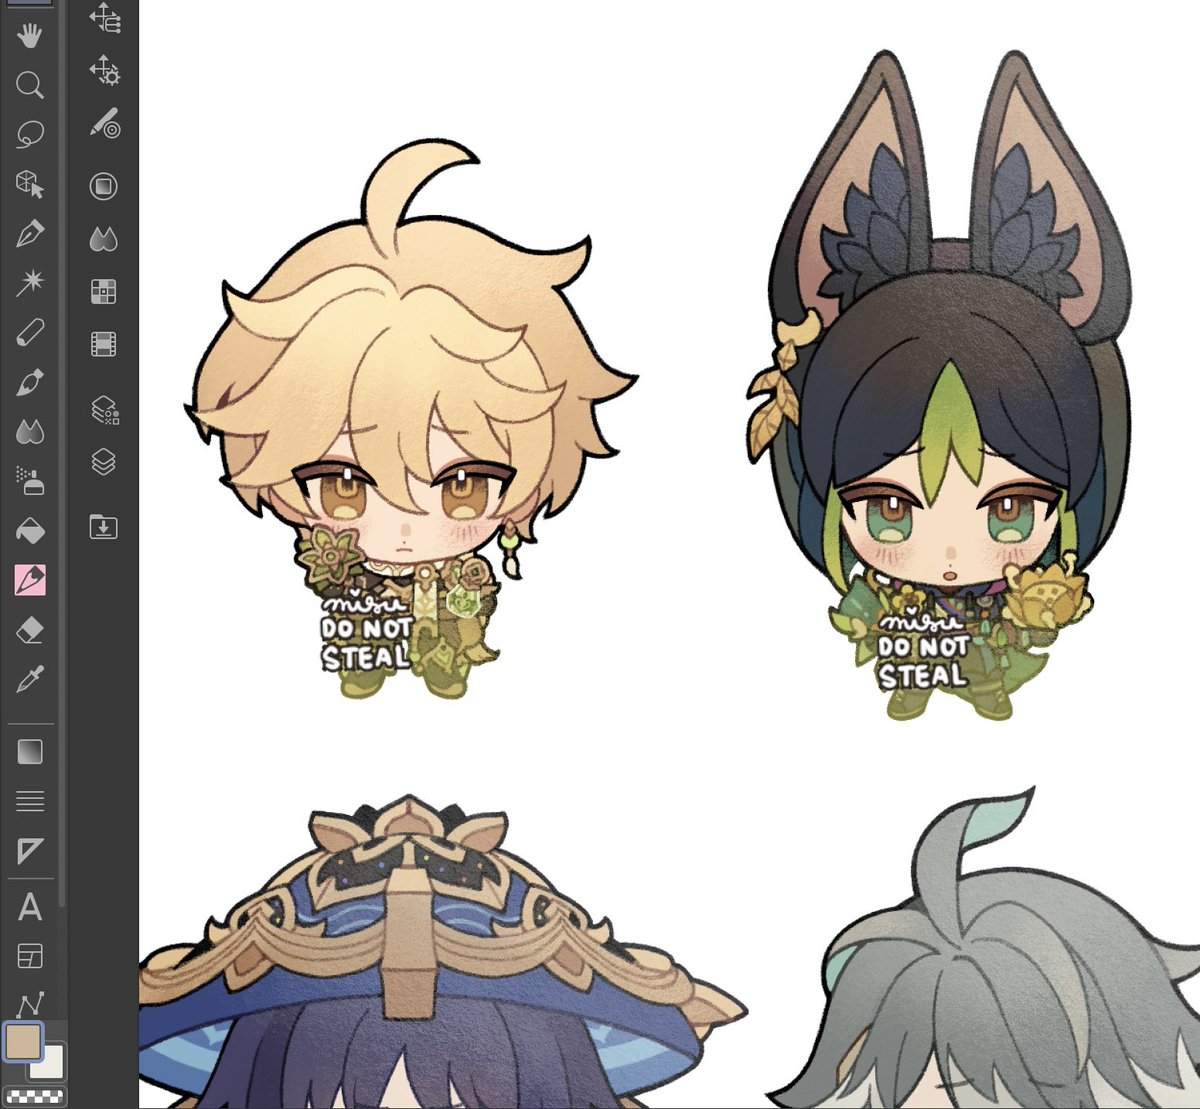 aether (genshin impact) ,scaramouche (genshin impact) blunt ends multiple boys blonde hair animal ears blue headwear bangs jewelry  illustration images